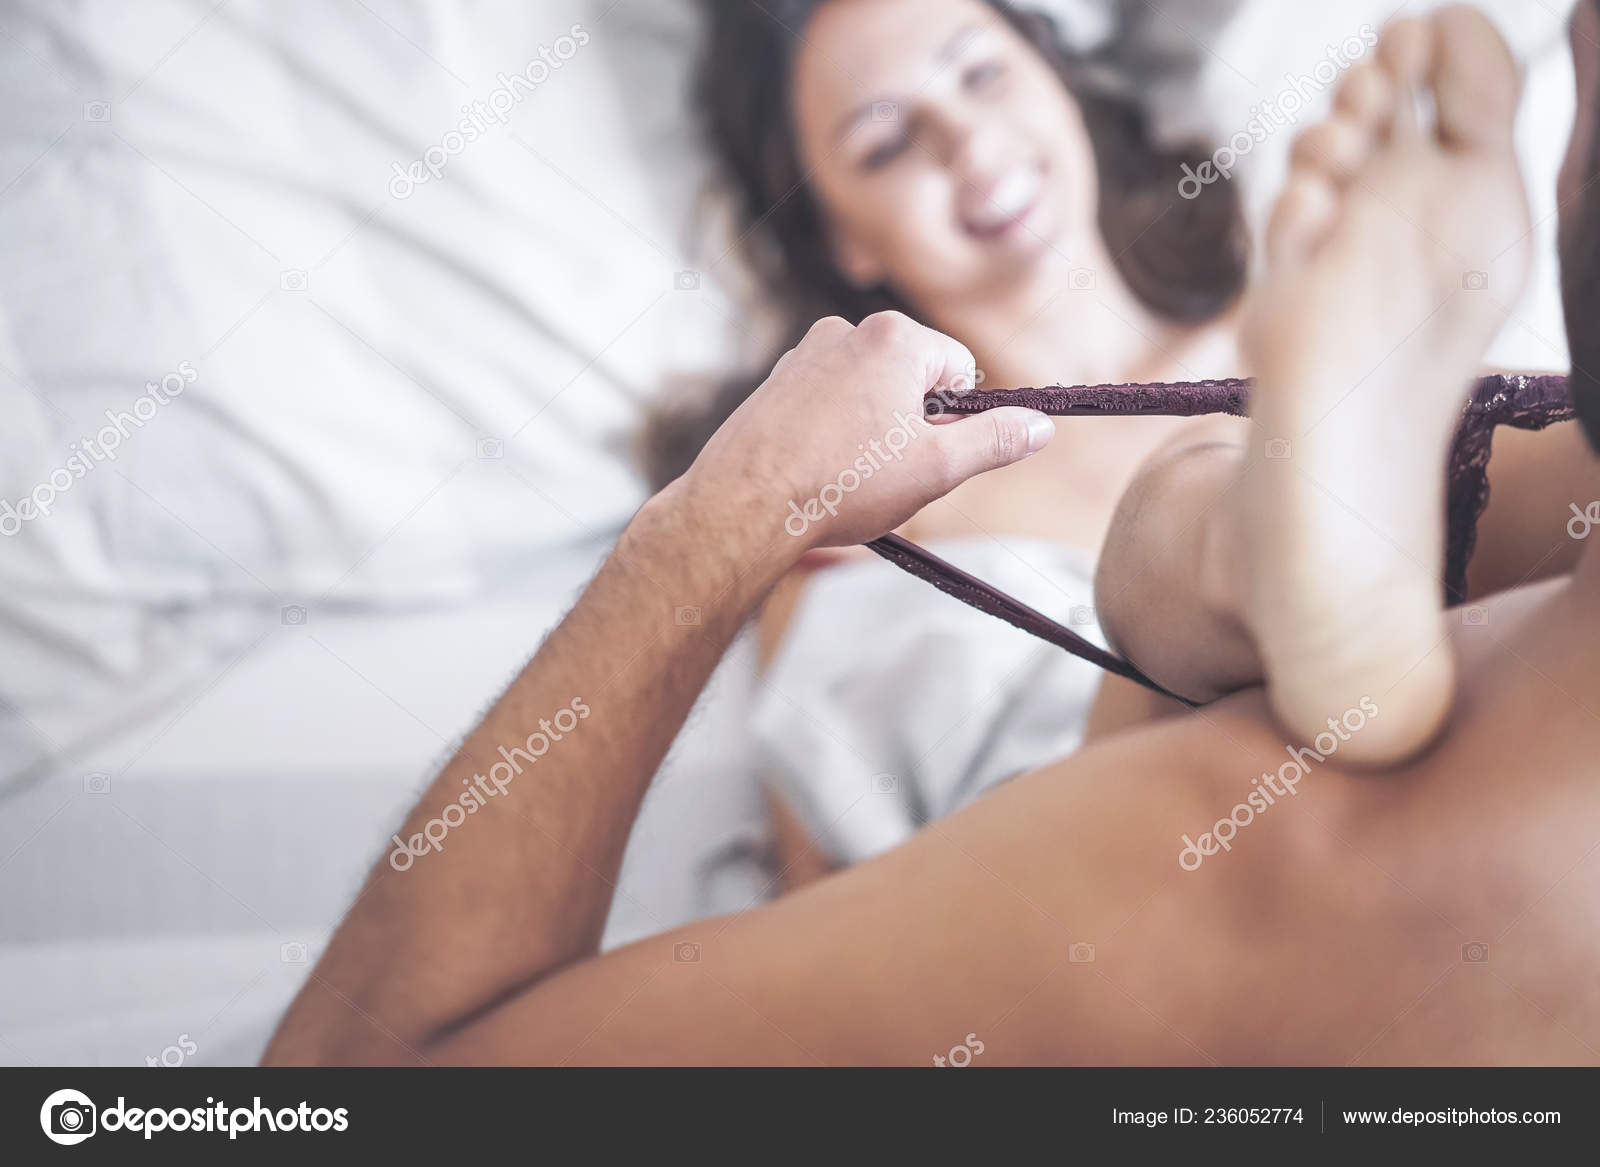 Boyfriend Putting His Girlfriends Panties Having Sex Bed Passionate Couple Stock Photo by ©AlessandroBiascioli 236052774 pic